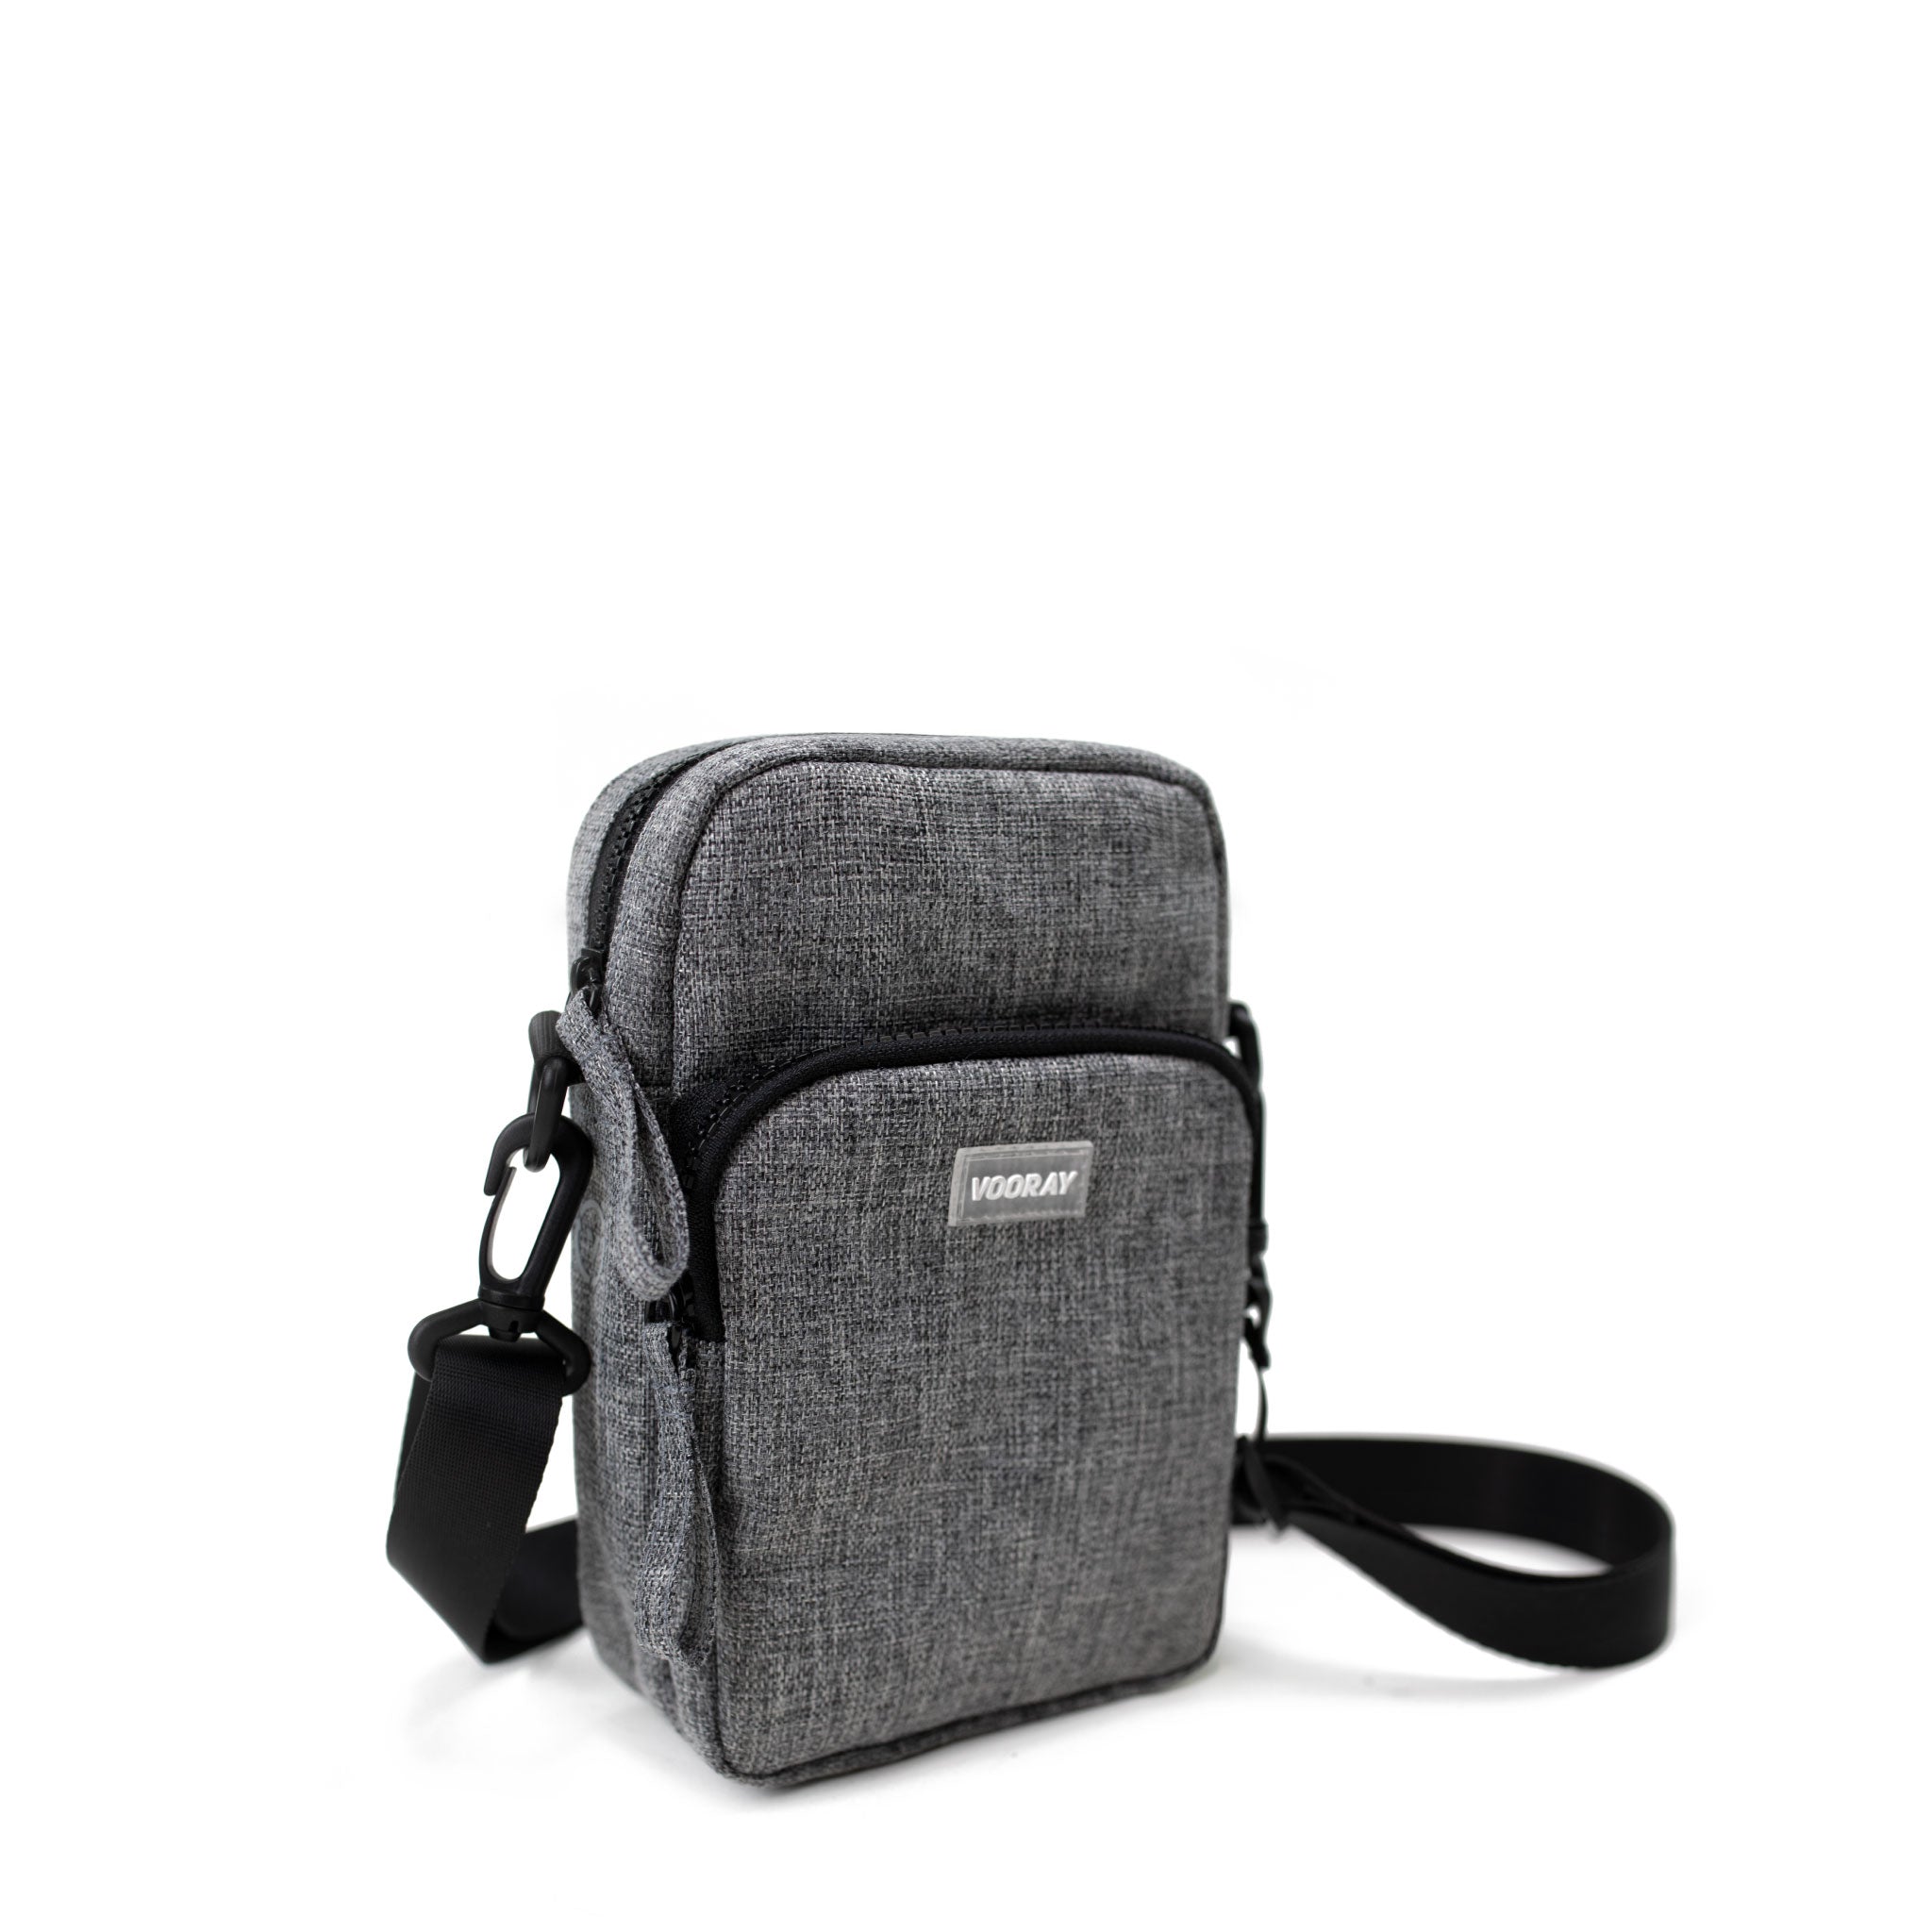 Vooray Lightweight Core Crossbody Bag for Gym, Travel, and Daily Use